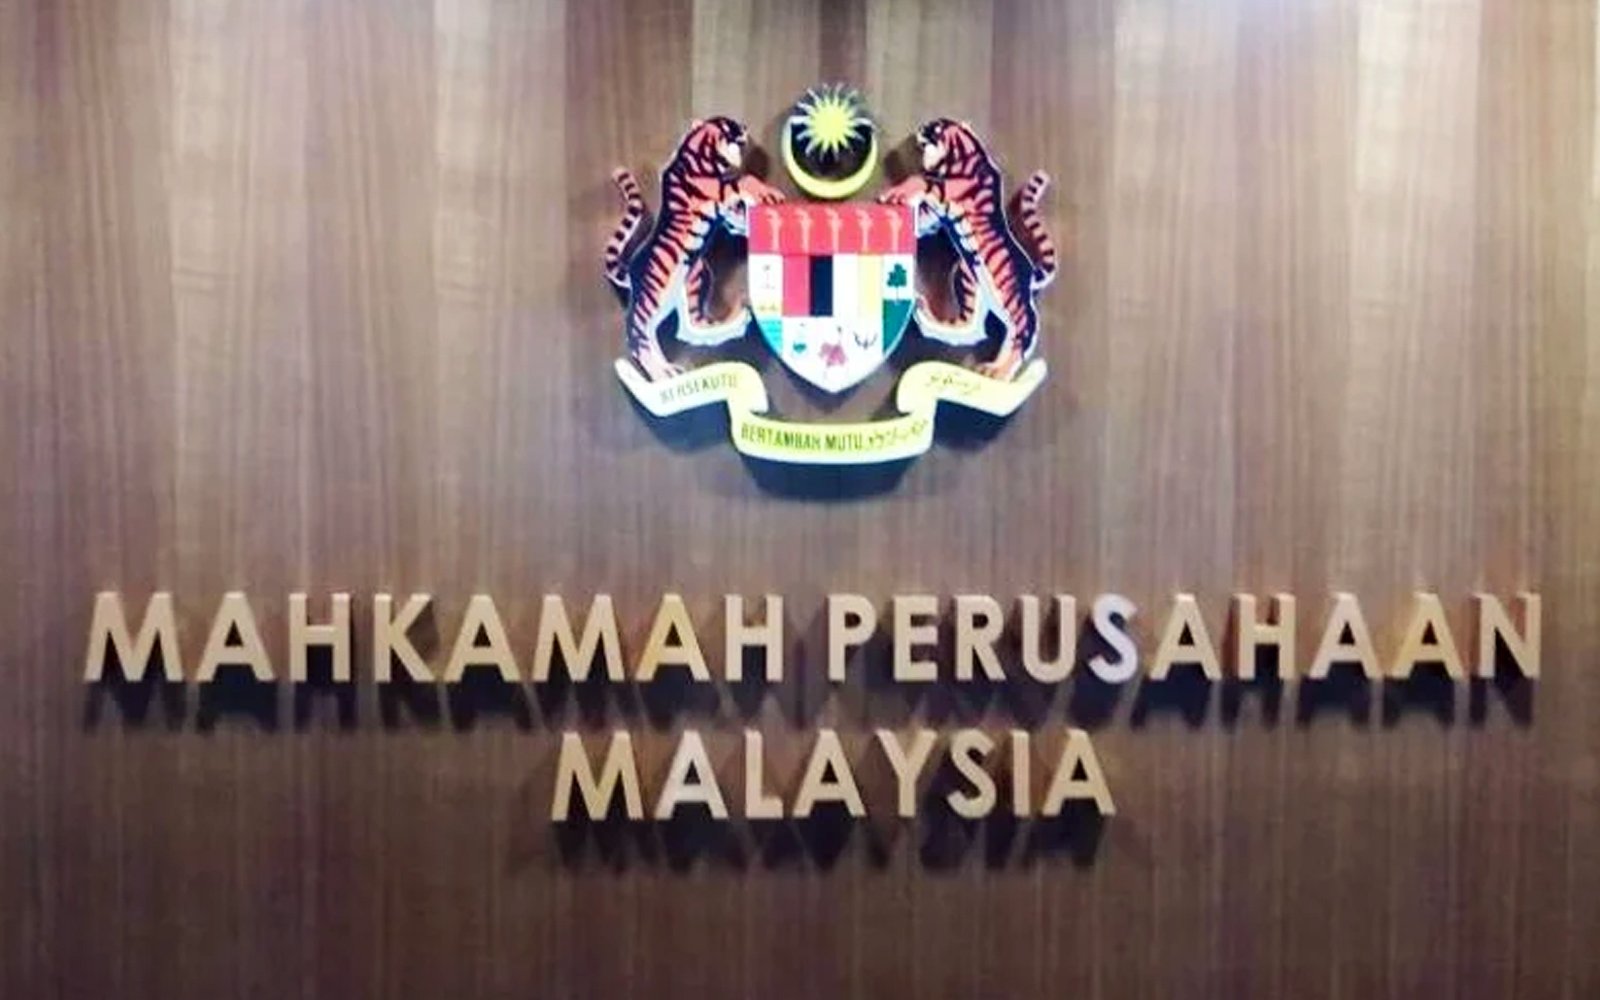 mahb employee’s verbal volley isolated, dismissal unwarranted, says court